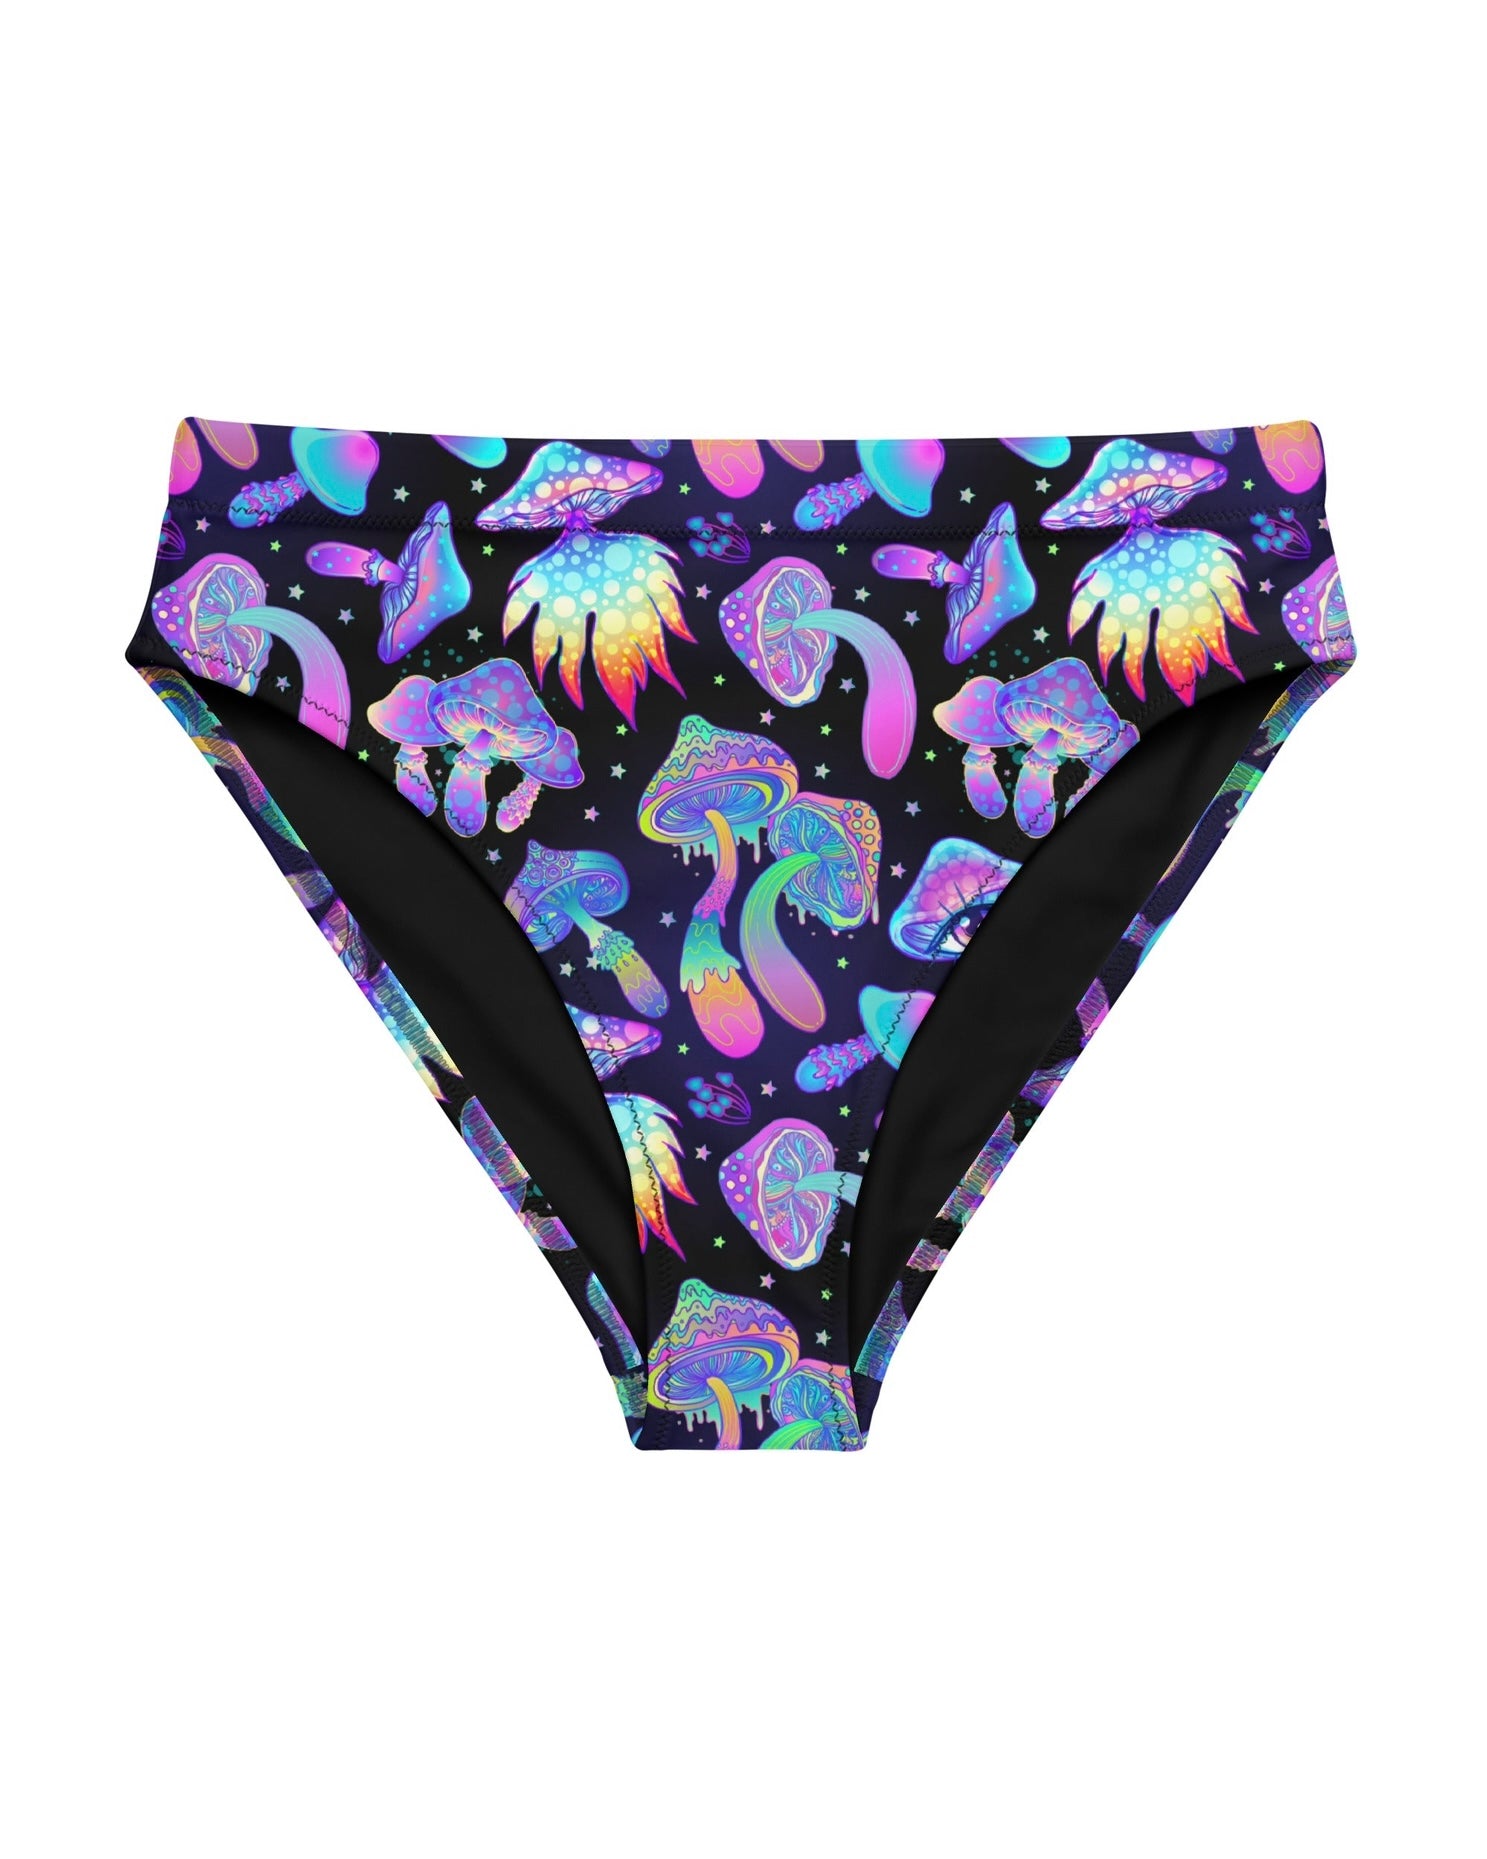 Shroomin Black Recycled High Waisted Bottoms, High-Waisted Bottoms, - One Stop Rave